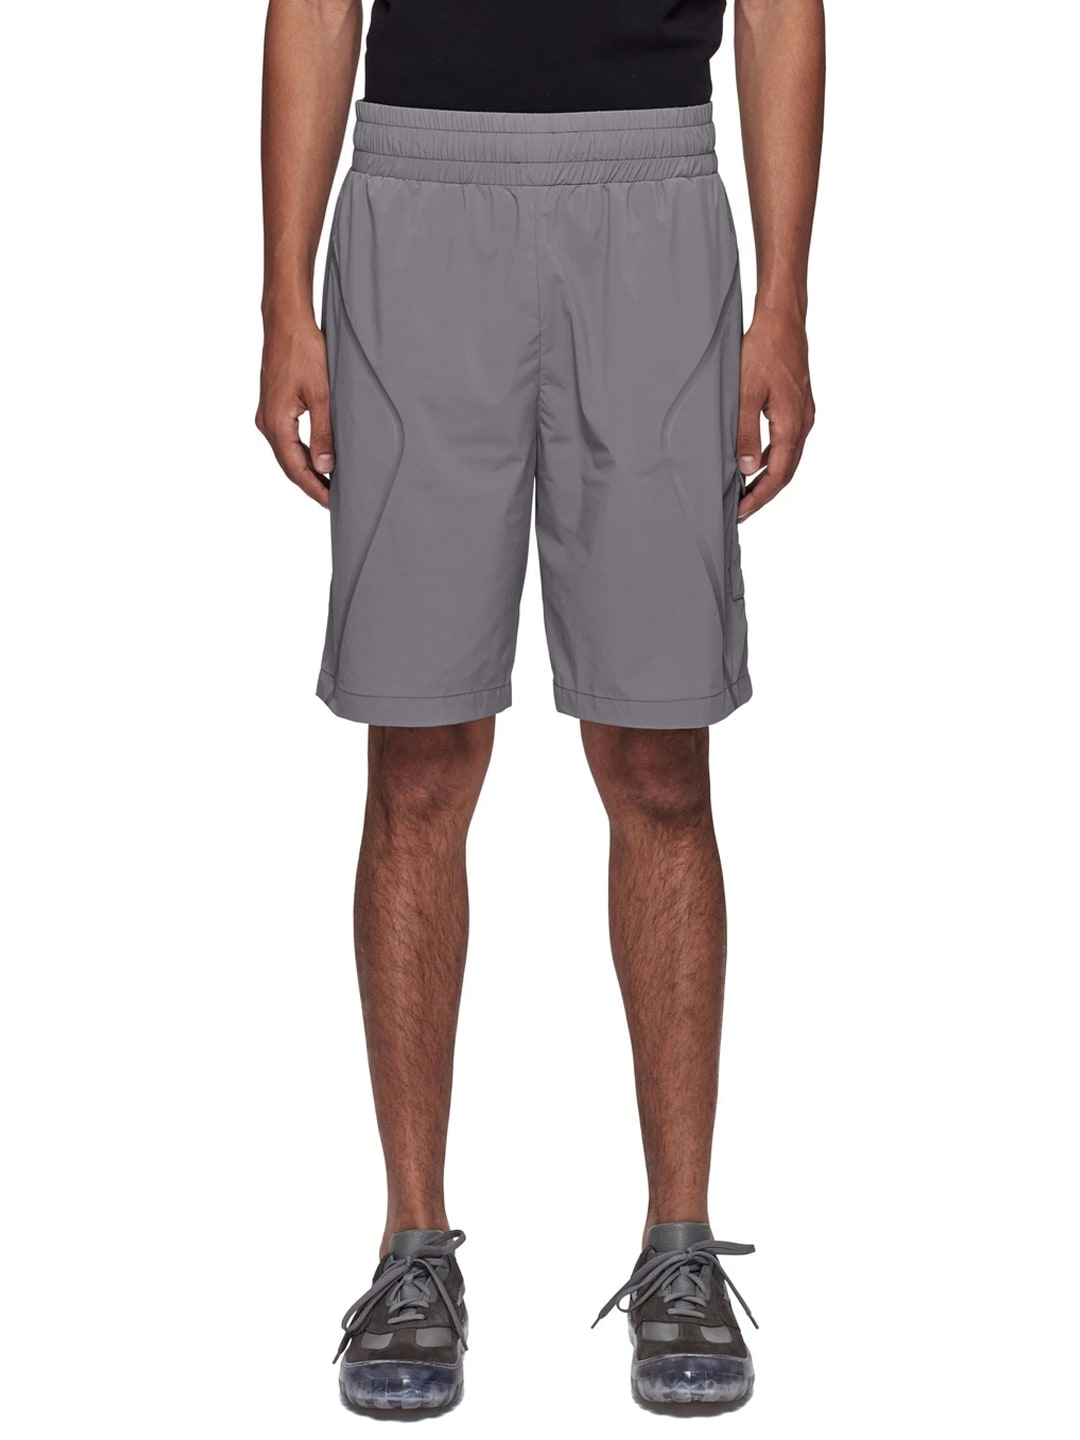 A-COLD-WALL Technical Fabric Shorts